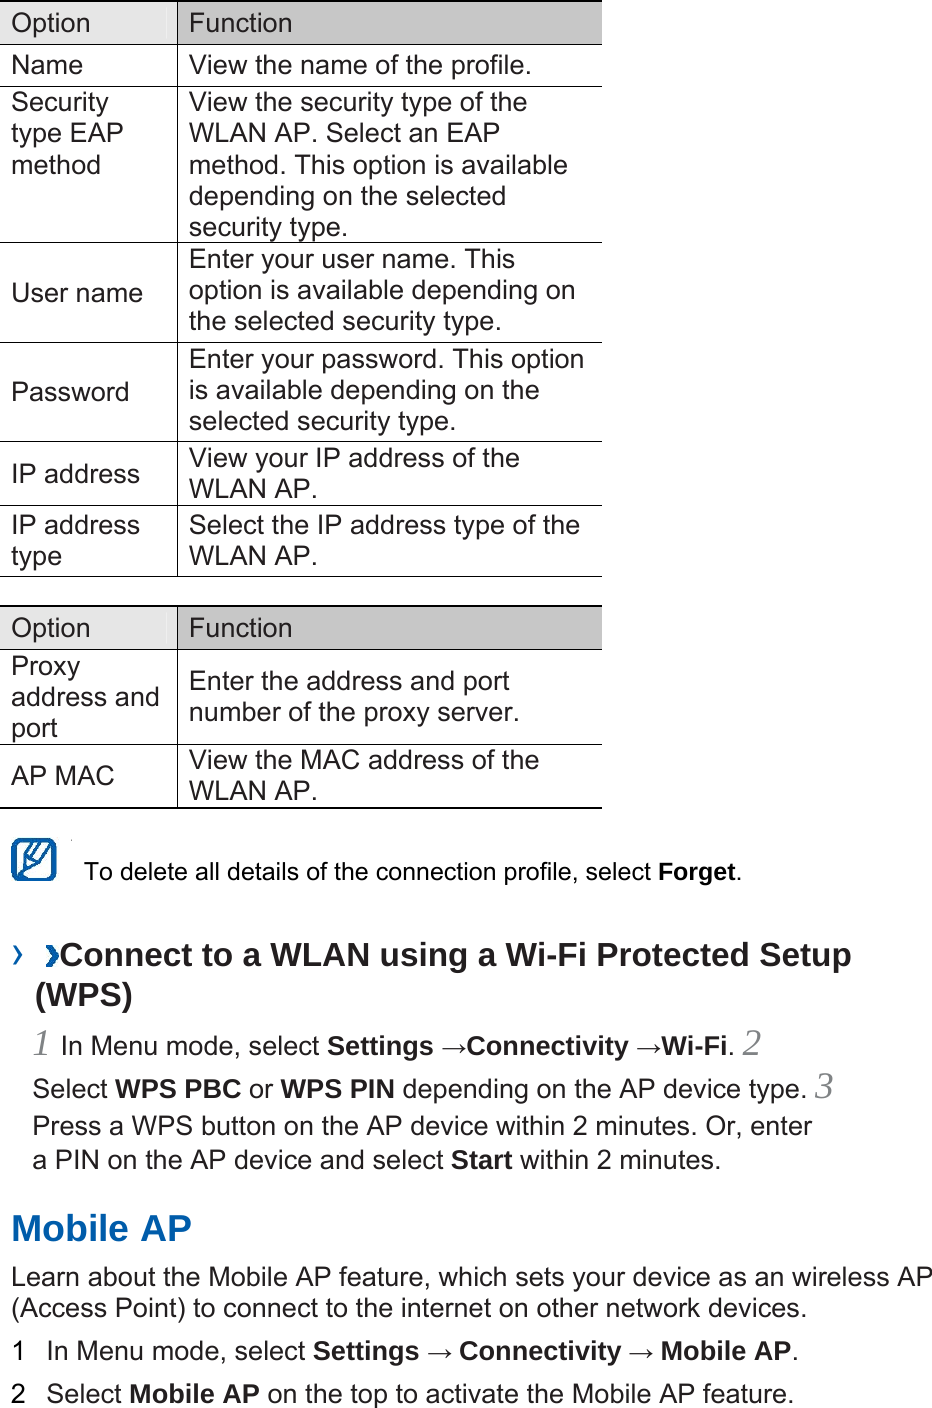 Option   Function  Name    View the name of the profile.   Security type EAP method  View the security type of the WLAN AP. Select an EAP method. This option is available depending on the selected security type.   User name   Enter your user name. This option is available depending on the selected security type.   Password  Enter your password. This option is available depending on the selected security type.   IP address    View your IP address of the WLAN AP.   IP address type  Select the IP address type of the WLAN AP.    Option   Function  Proxy address and port  Enter the address and port number of the proxy server.   AP MAC    View the MAC address of the WLAN AP.      To delete all details of the connection profile, select Forget.  ›  Connect to a WLAN using a Wi-Fi Protected Setup (WPS)   1 In Menu mode, select Settings →Connectivity →Wi-Fi. 2 Select WPS PBC or WPS PIN depending on the AP device type. 3 Press a WPS button on the AP device within 2 minutes. Or, enter a PIN on the AP device and select Start within 2 minutes.   Mobile AP   Learn about the Mobile AP feature, which sets your device as an wireless AP (Access Point) to connect to the internet on other network devices.   1  In Menu mode, select Settings → Connectivity → Mobile AP.  2  Select Mobile AP on the top to activate the Mobile AP feature.   